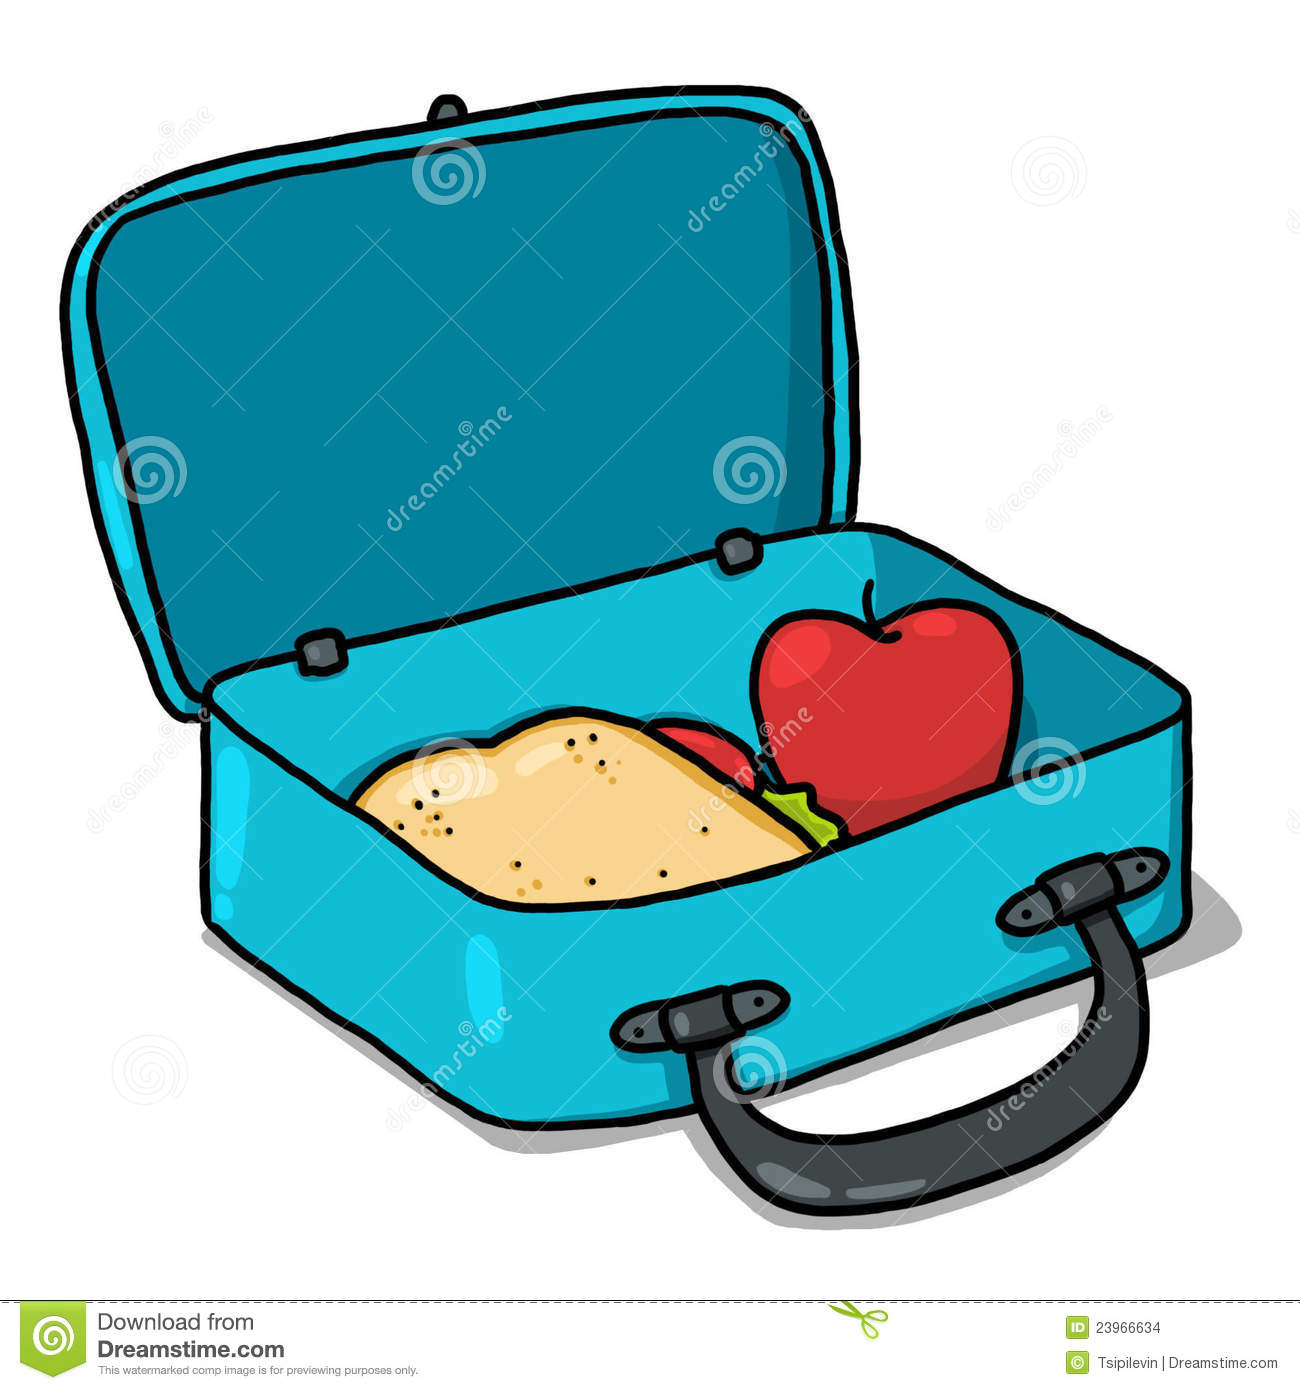 Open Lunch Box Illustration  Isolated Lunch Box With Sandwich And